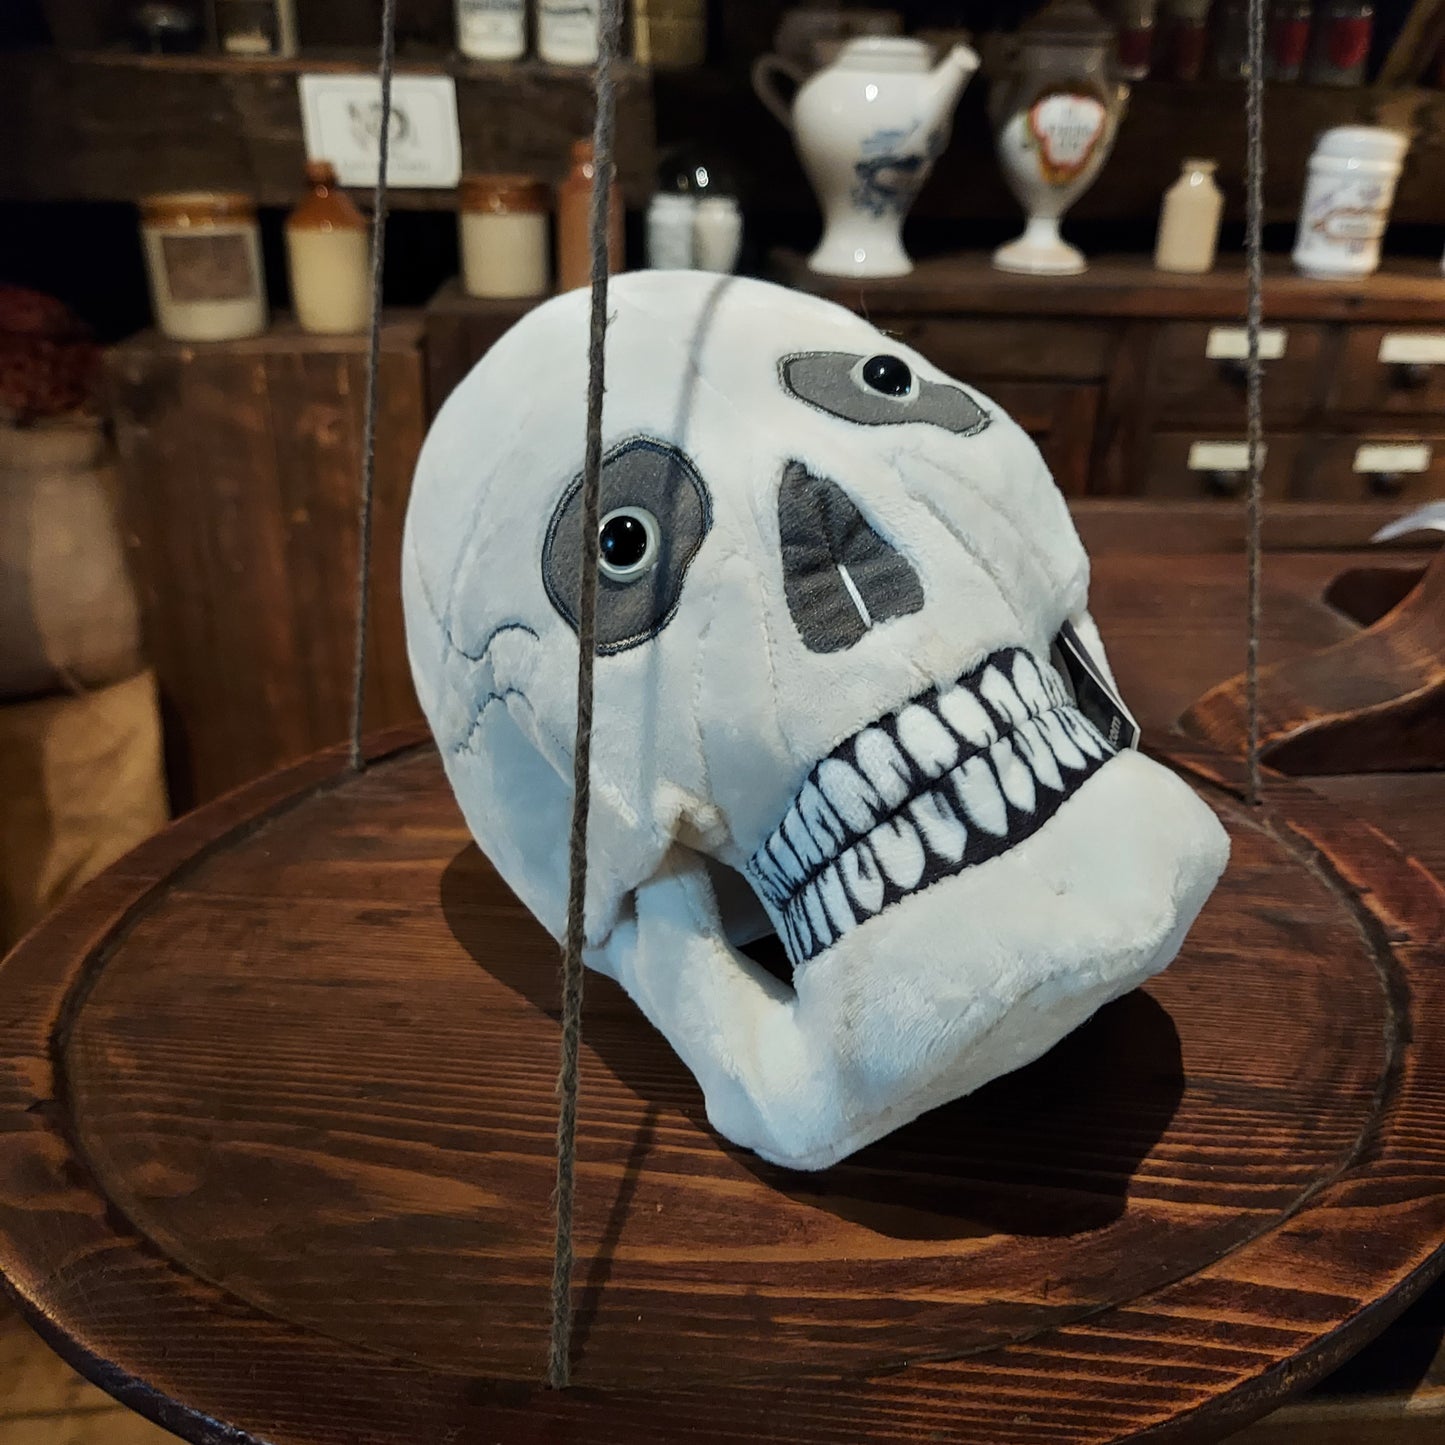 A skull plush placed on a wooden scale in the museum